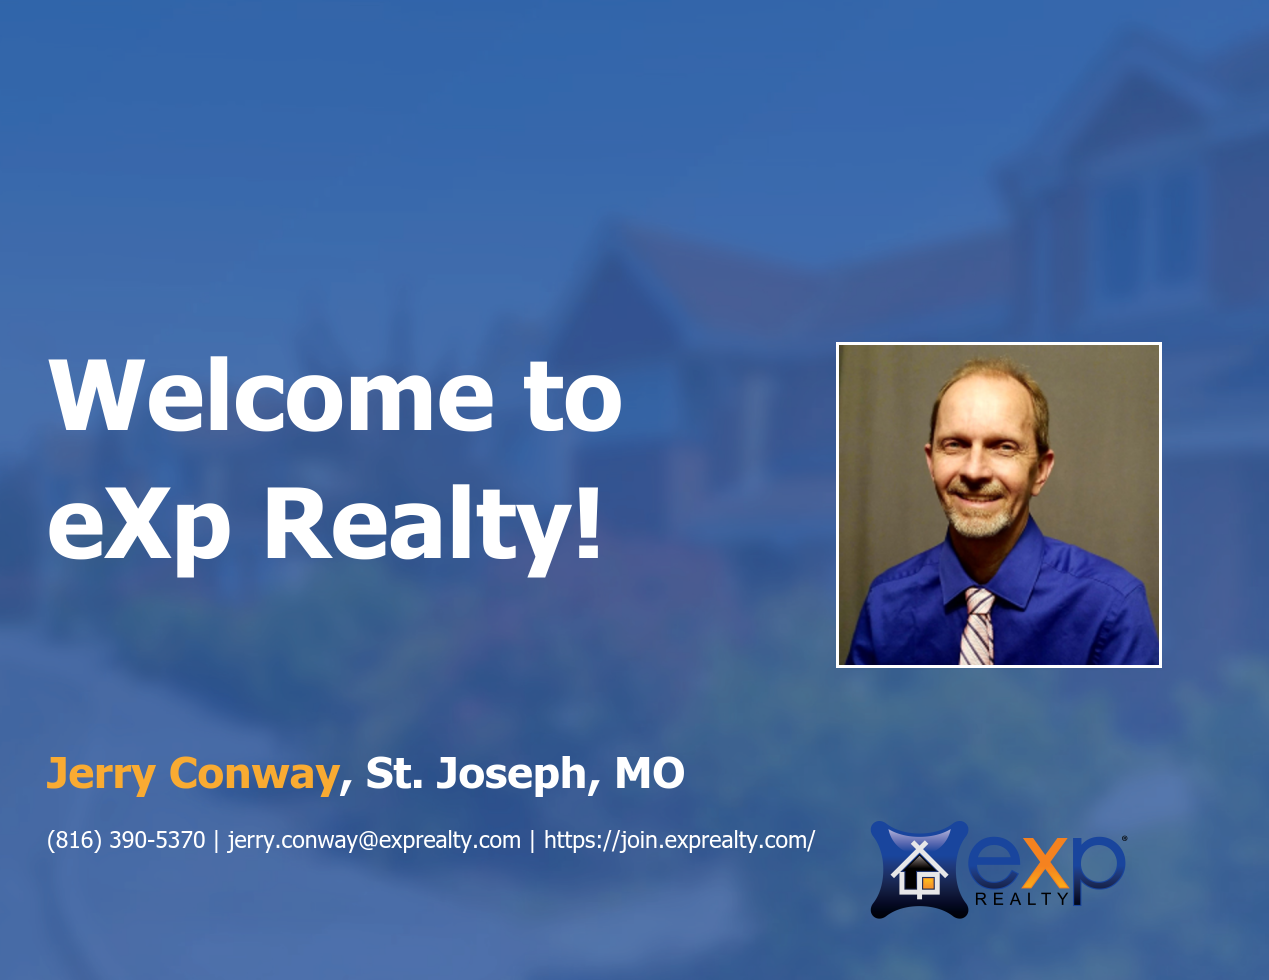 Welcome to eXp Realty Jerry Conway!